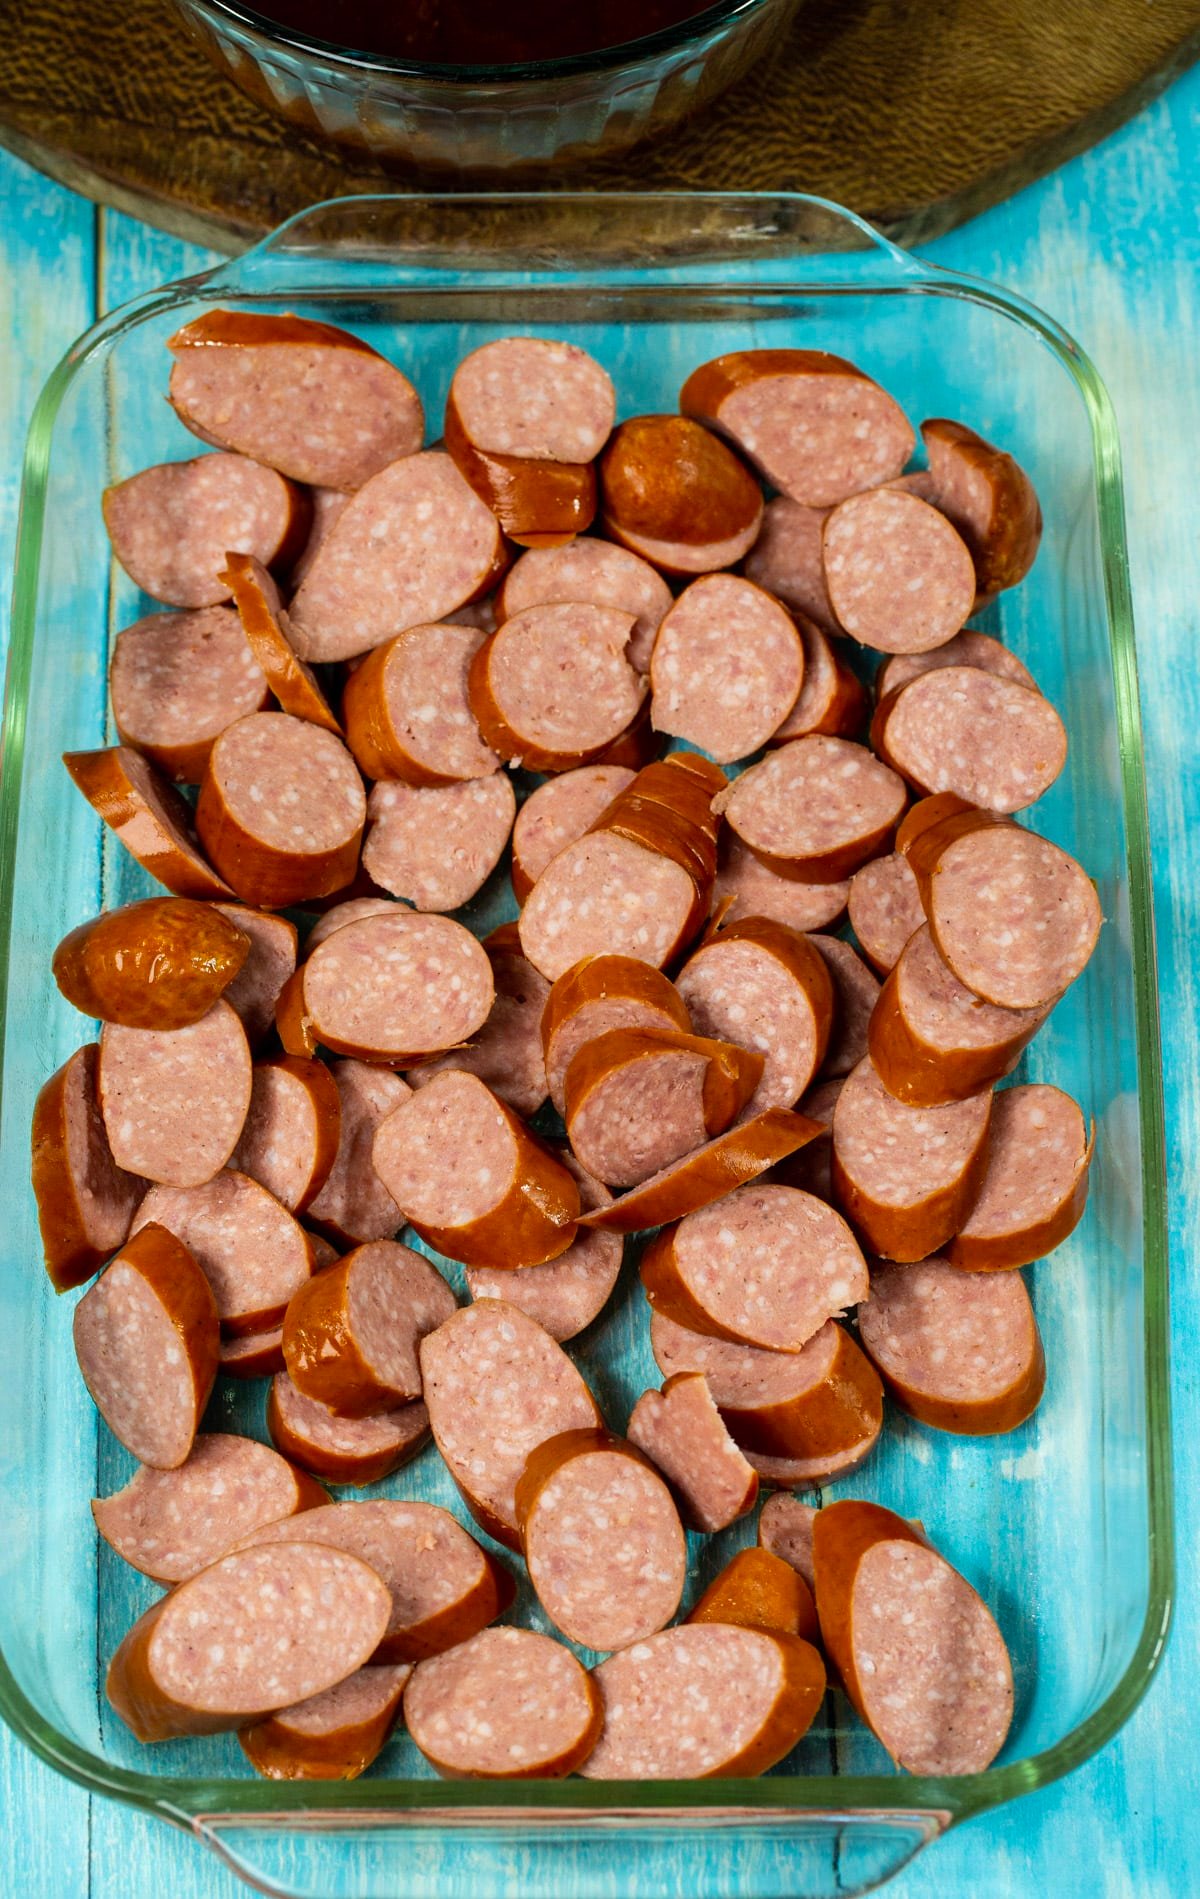 Uncooked sausage slices in baking dish.